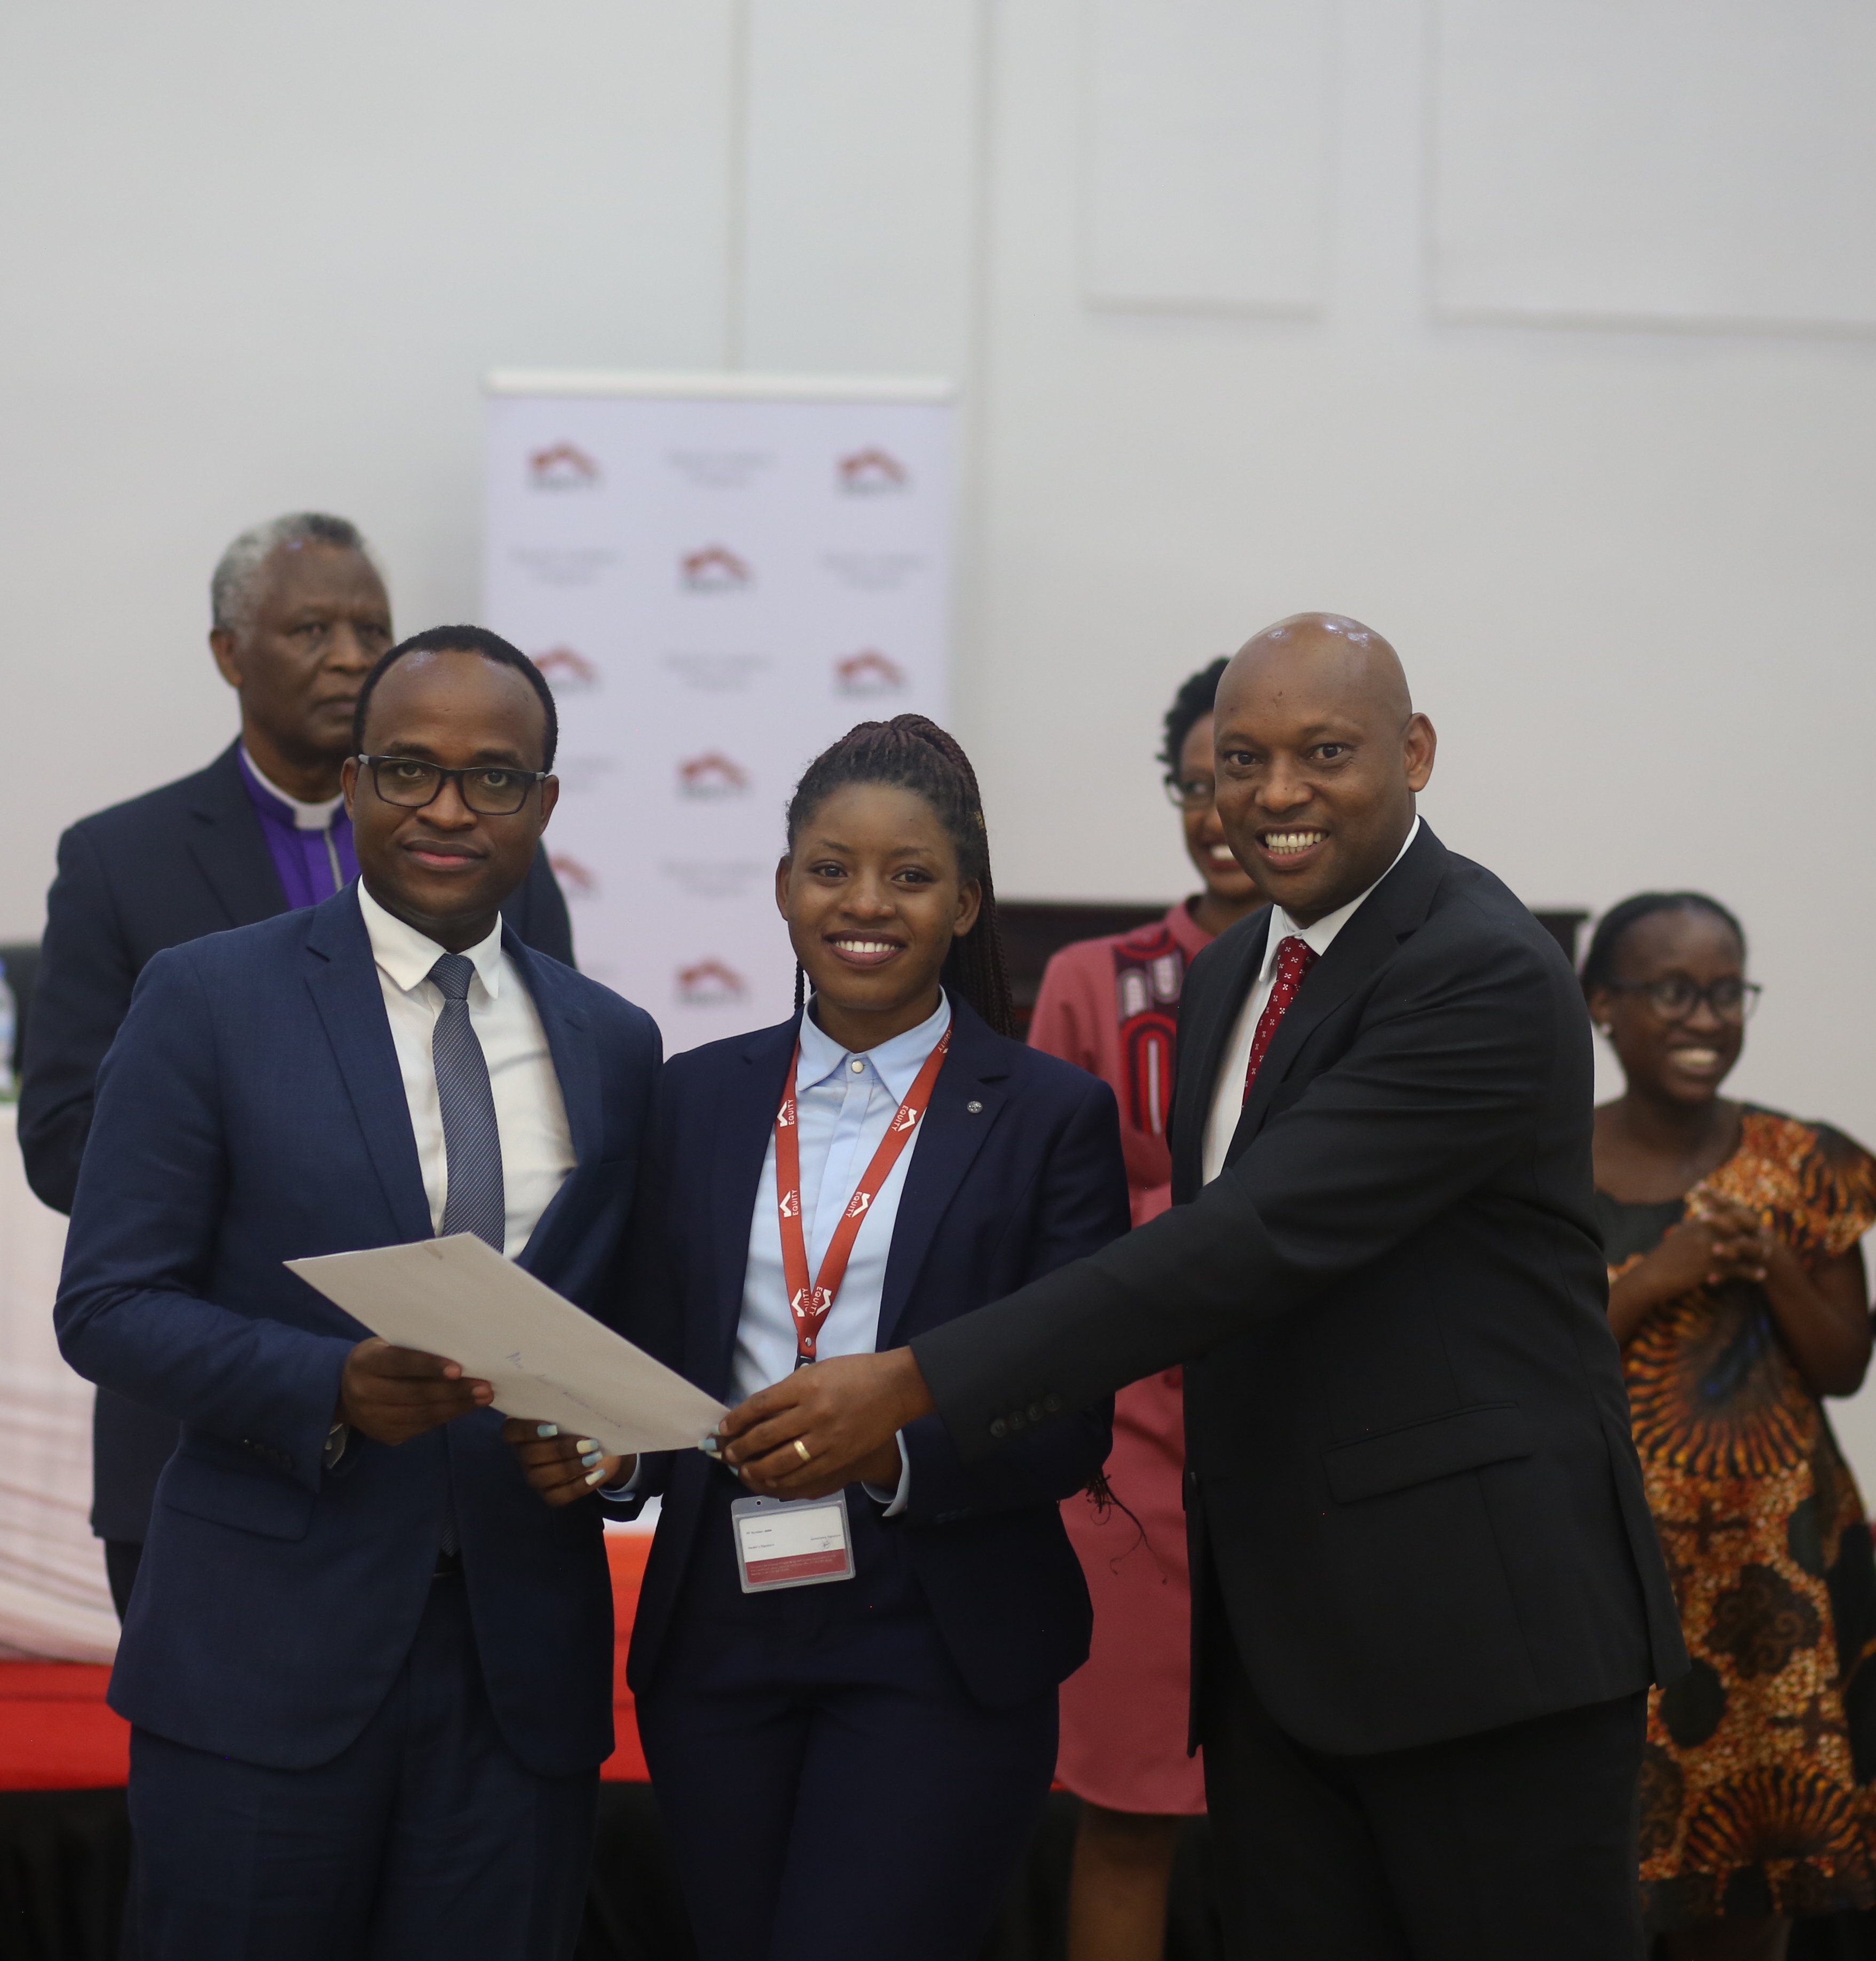 Equity Bank Rwanda extends its social impact contribution by launching its signature education and leadership development program, the Equity Leaders Program (ELP)